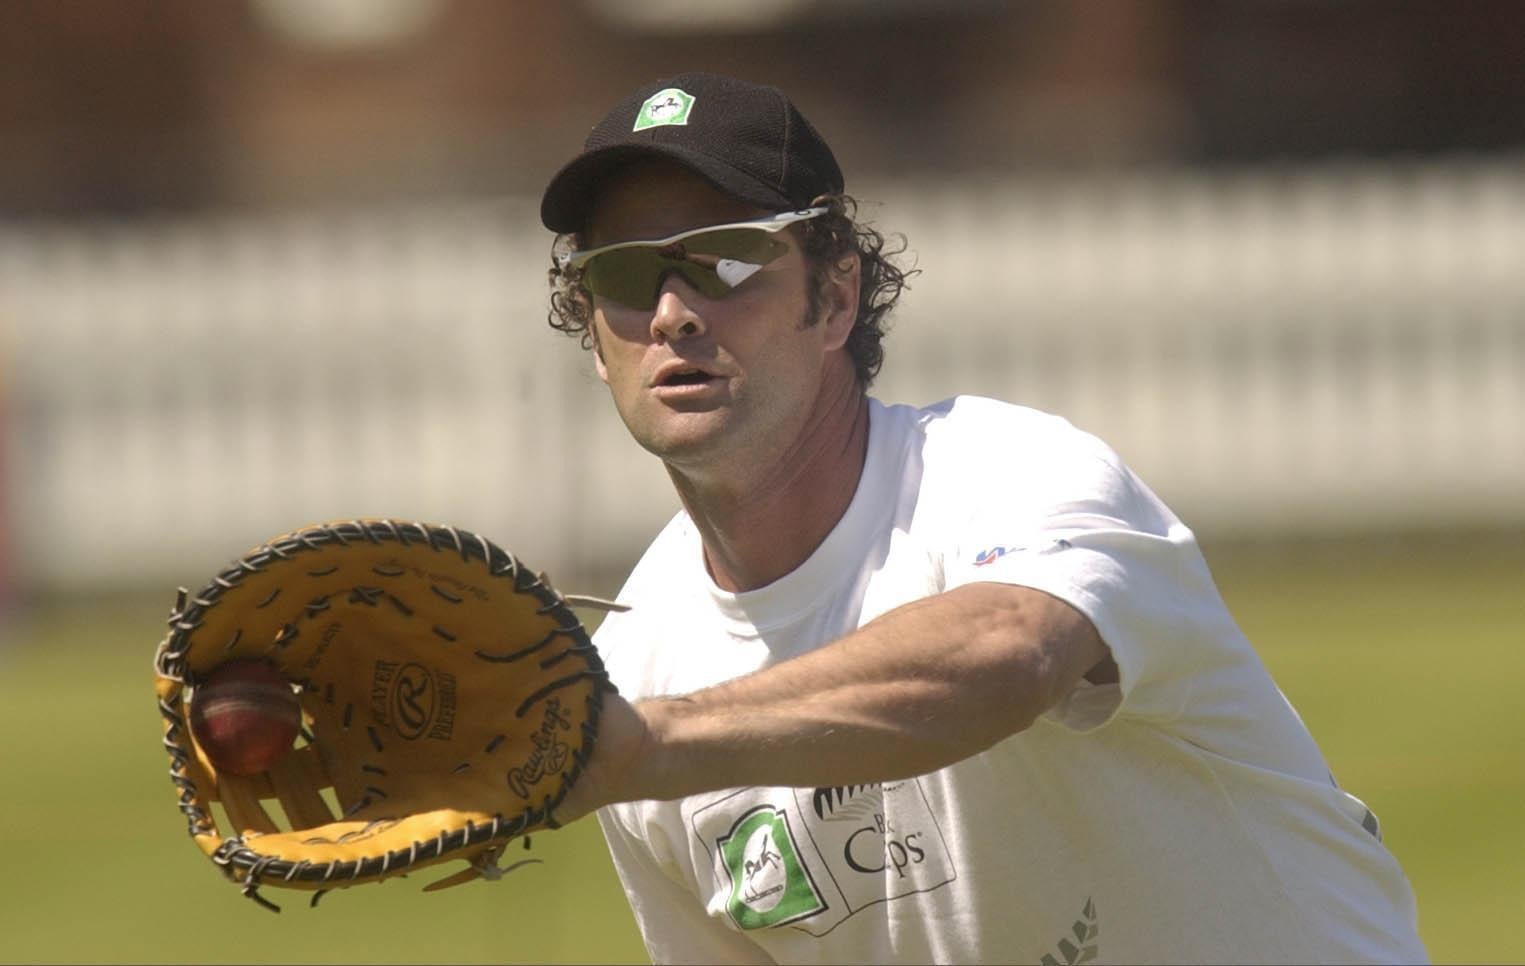 Chris Cairns remains in a serious condition after undergoing a second heart operation (Chris Young/PA)